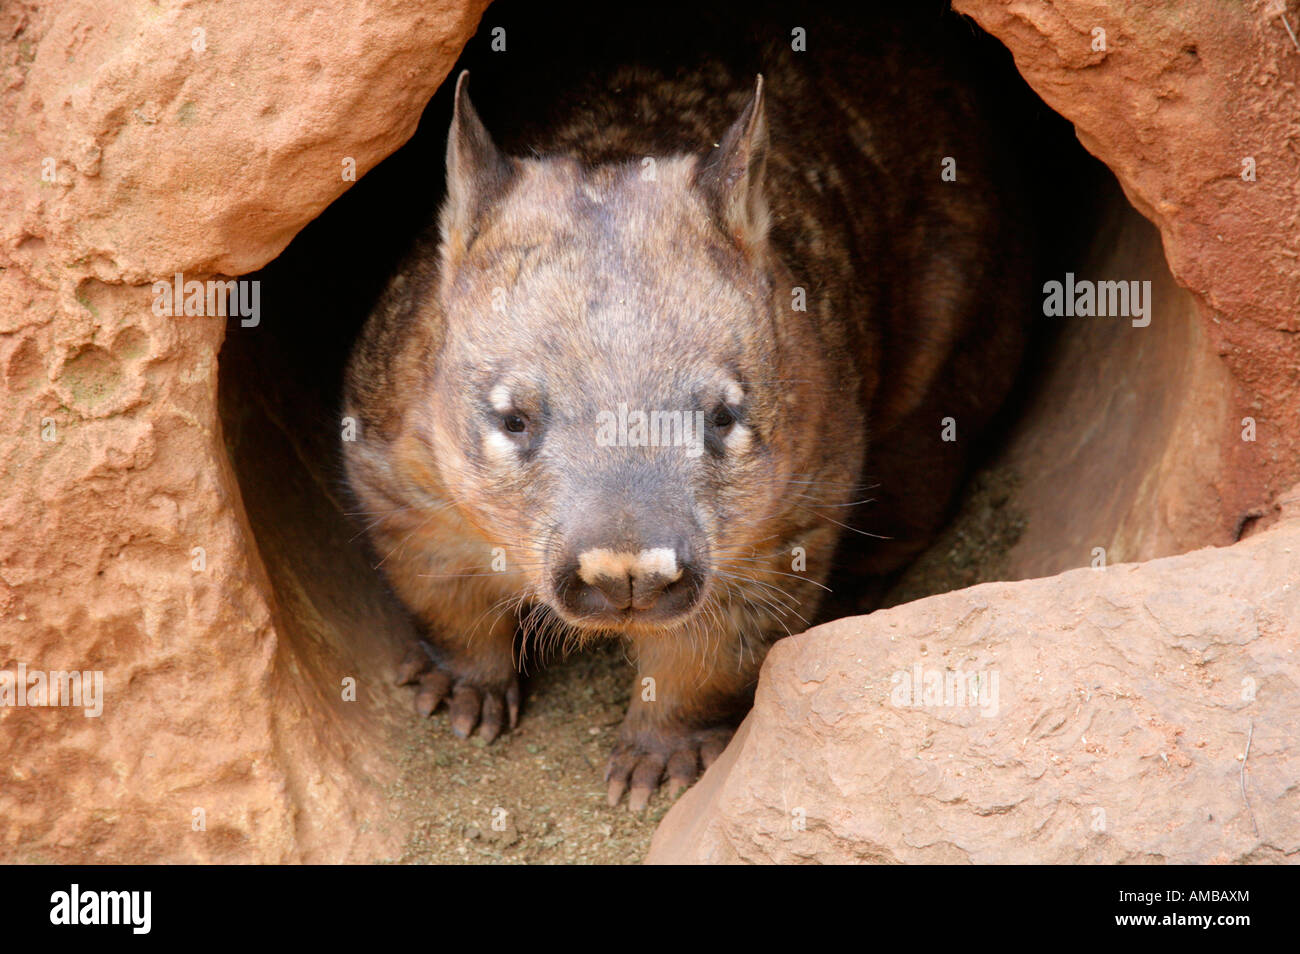 Australian Southern Hairy Nosed Wombat, Laisiorhinus talifrons, emerging from tunnel burrow. Stock Photo